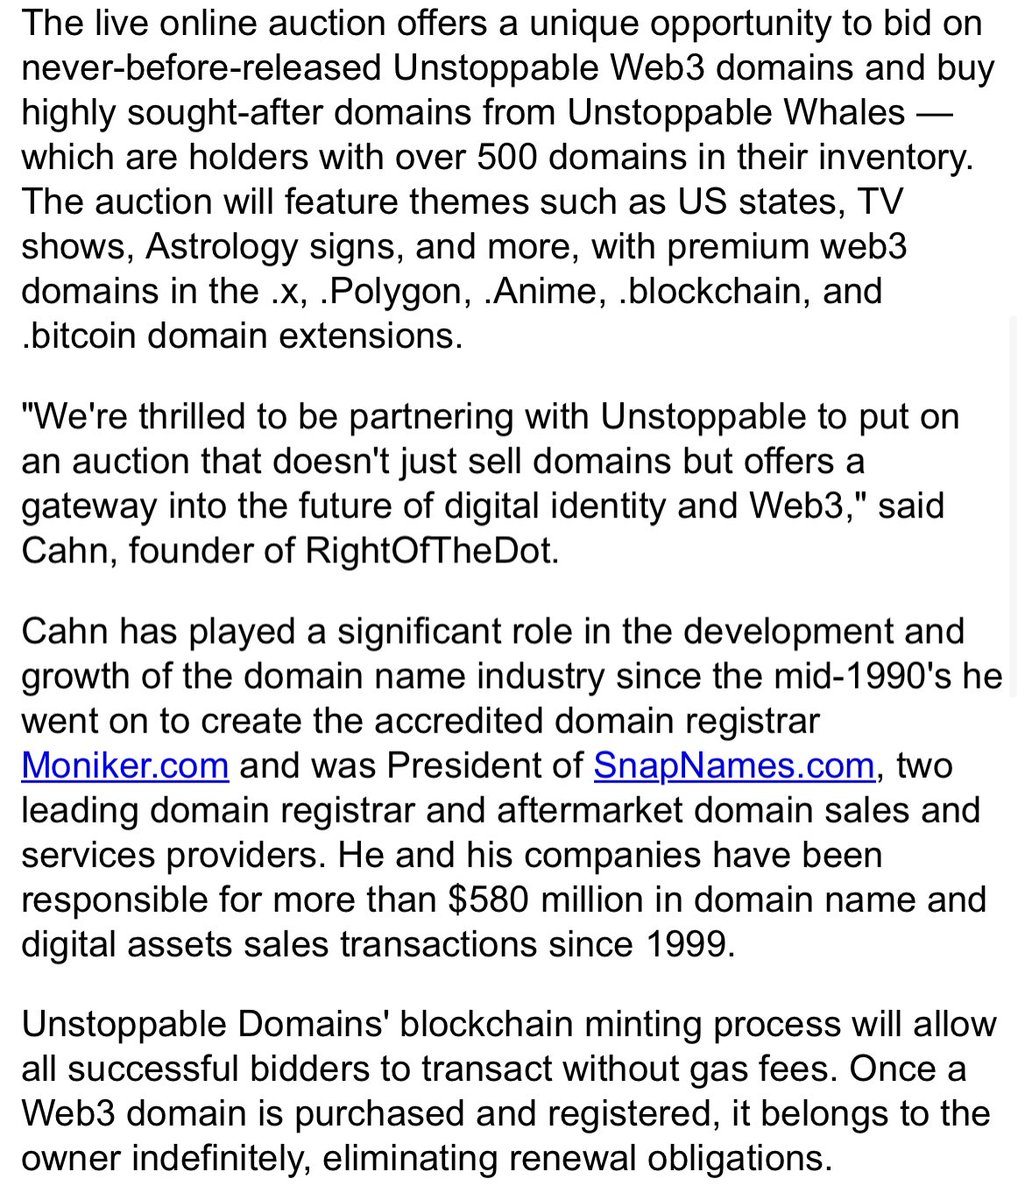 Digital Asset Auctioneer RightOfTheDot Teams Up With Unstoppable Domains To Auction Premium Web3 Domains

— Street Insider

Article: streetinsider.com/dr/news.php?id…

Auction: bid.rotd.com/ui/auctions/10…